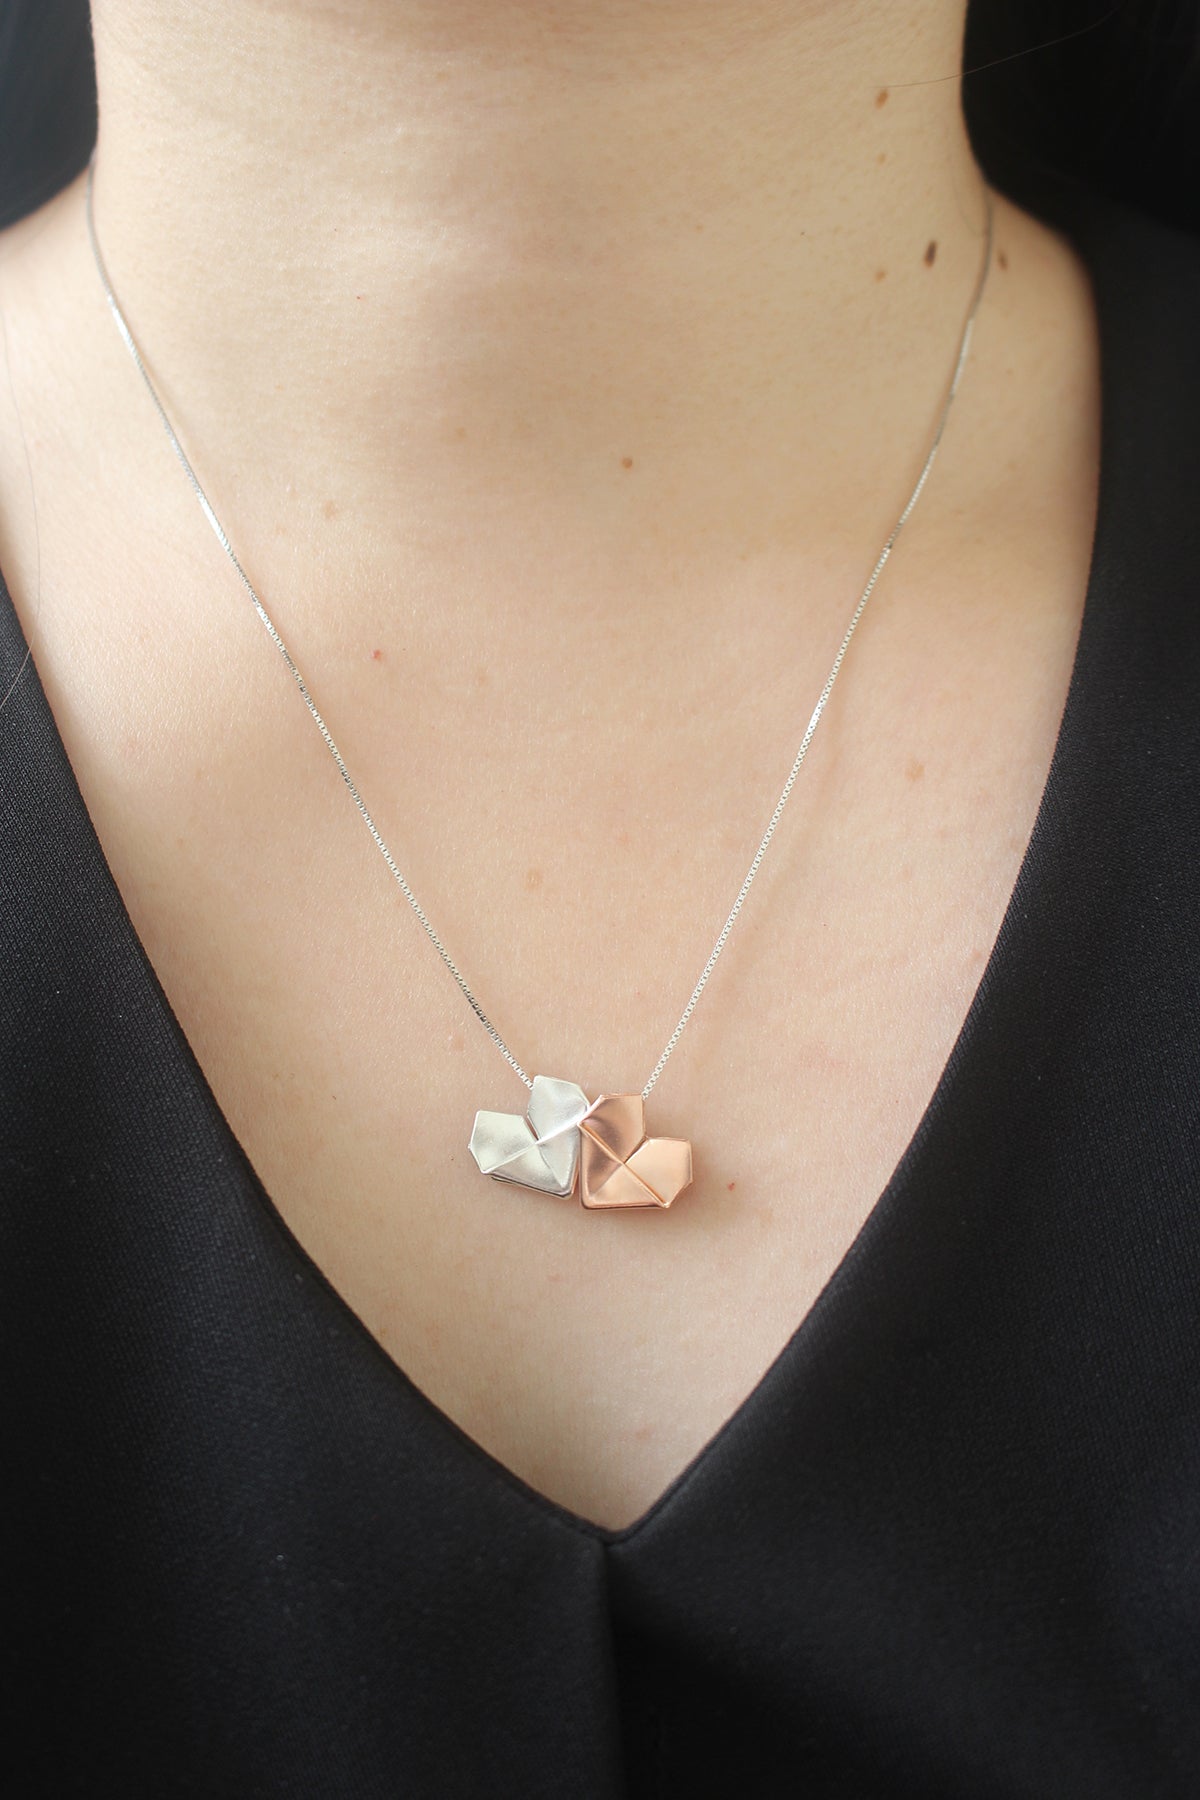 Trio Heart Necklace - Silver Origami Heart Necklace in Three Colors